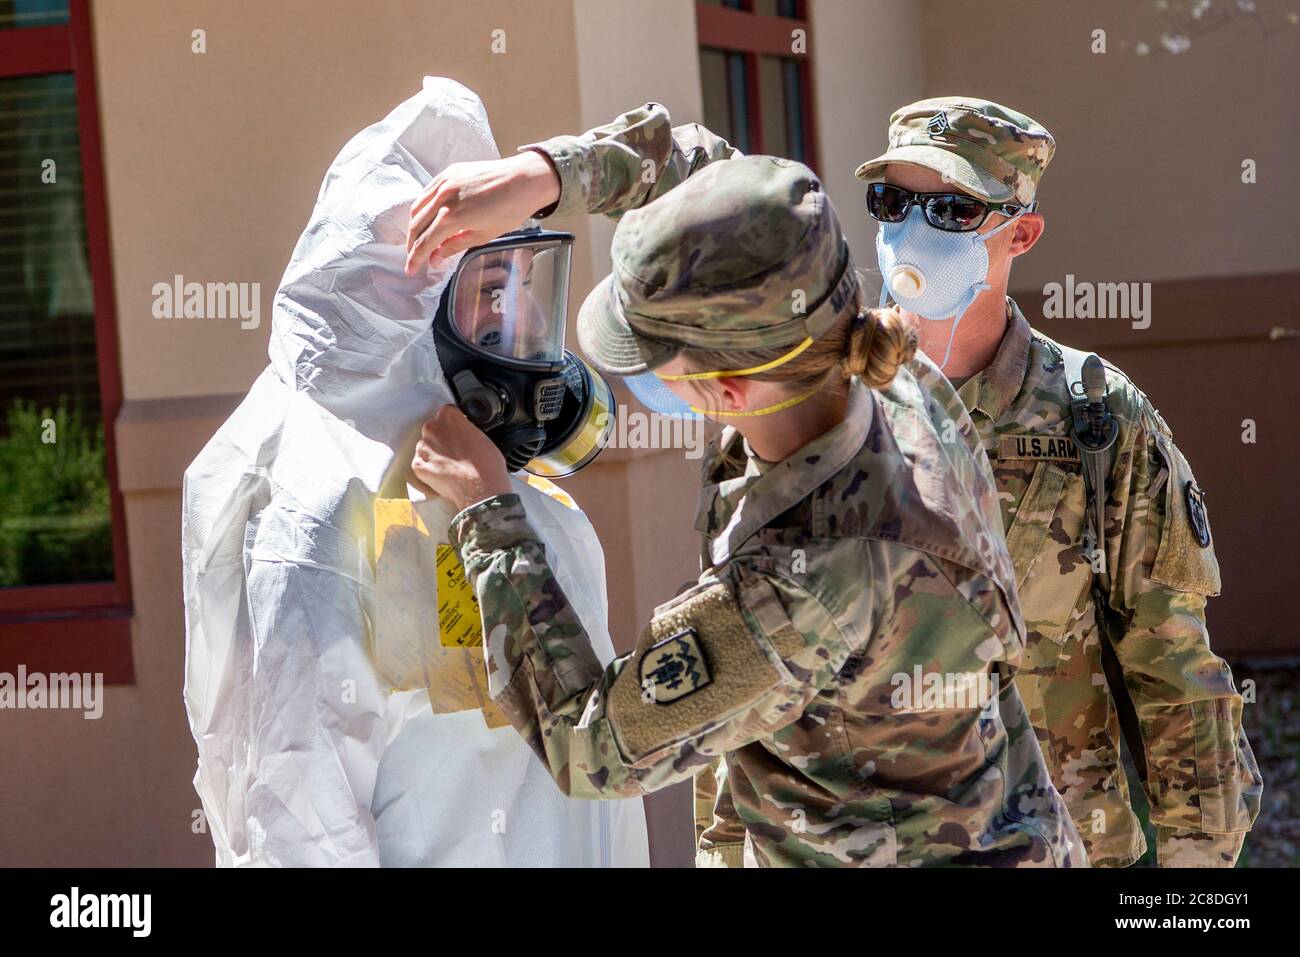 Colorado National Guard members of the Chemical, Biological, Radiological, Nuclear and high-yield (CBRNE) Enhanced Response Force Package (CERFP) team member, processes through the decontamination station after performing COVID-19 testing at a state veterans home in Aurora, Colorado, April 29, 2020. At the direction of Governor Jared Polis, the Colorado CERFP is assisting the state emergency operations center and Colorado Department of Public Health and Environment increase testing procedures and enabling state and local officials with an increased capability where needed.  (U.S. Air National Stock Photo